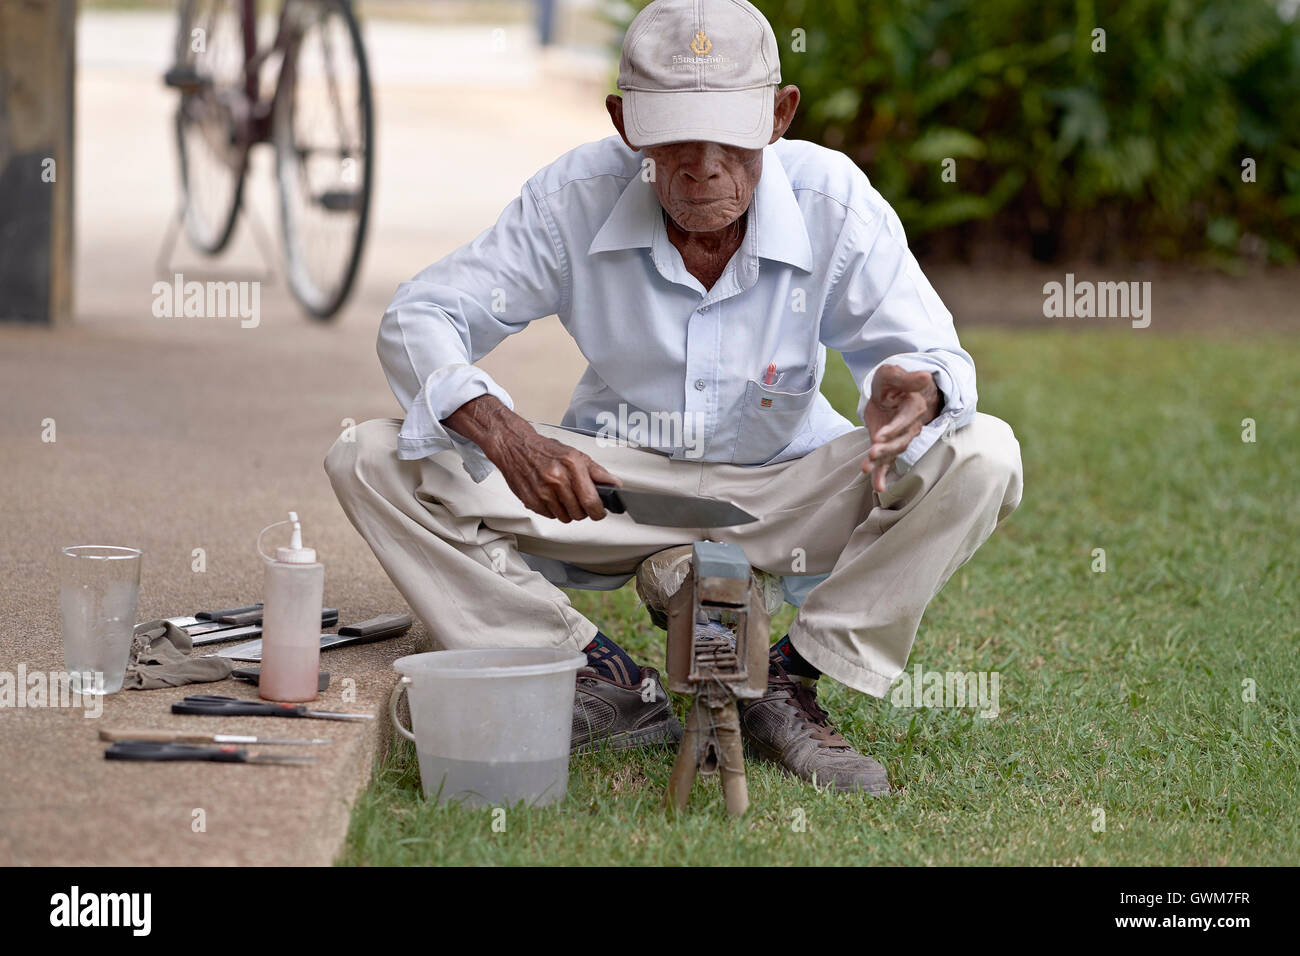 Knife grinder. 75 year old elderly man at work sharpening household implements . Thailand S. E. Asia Stock Photo